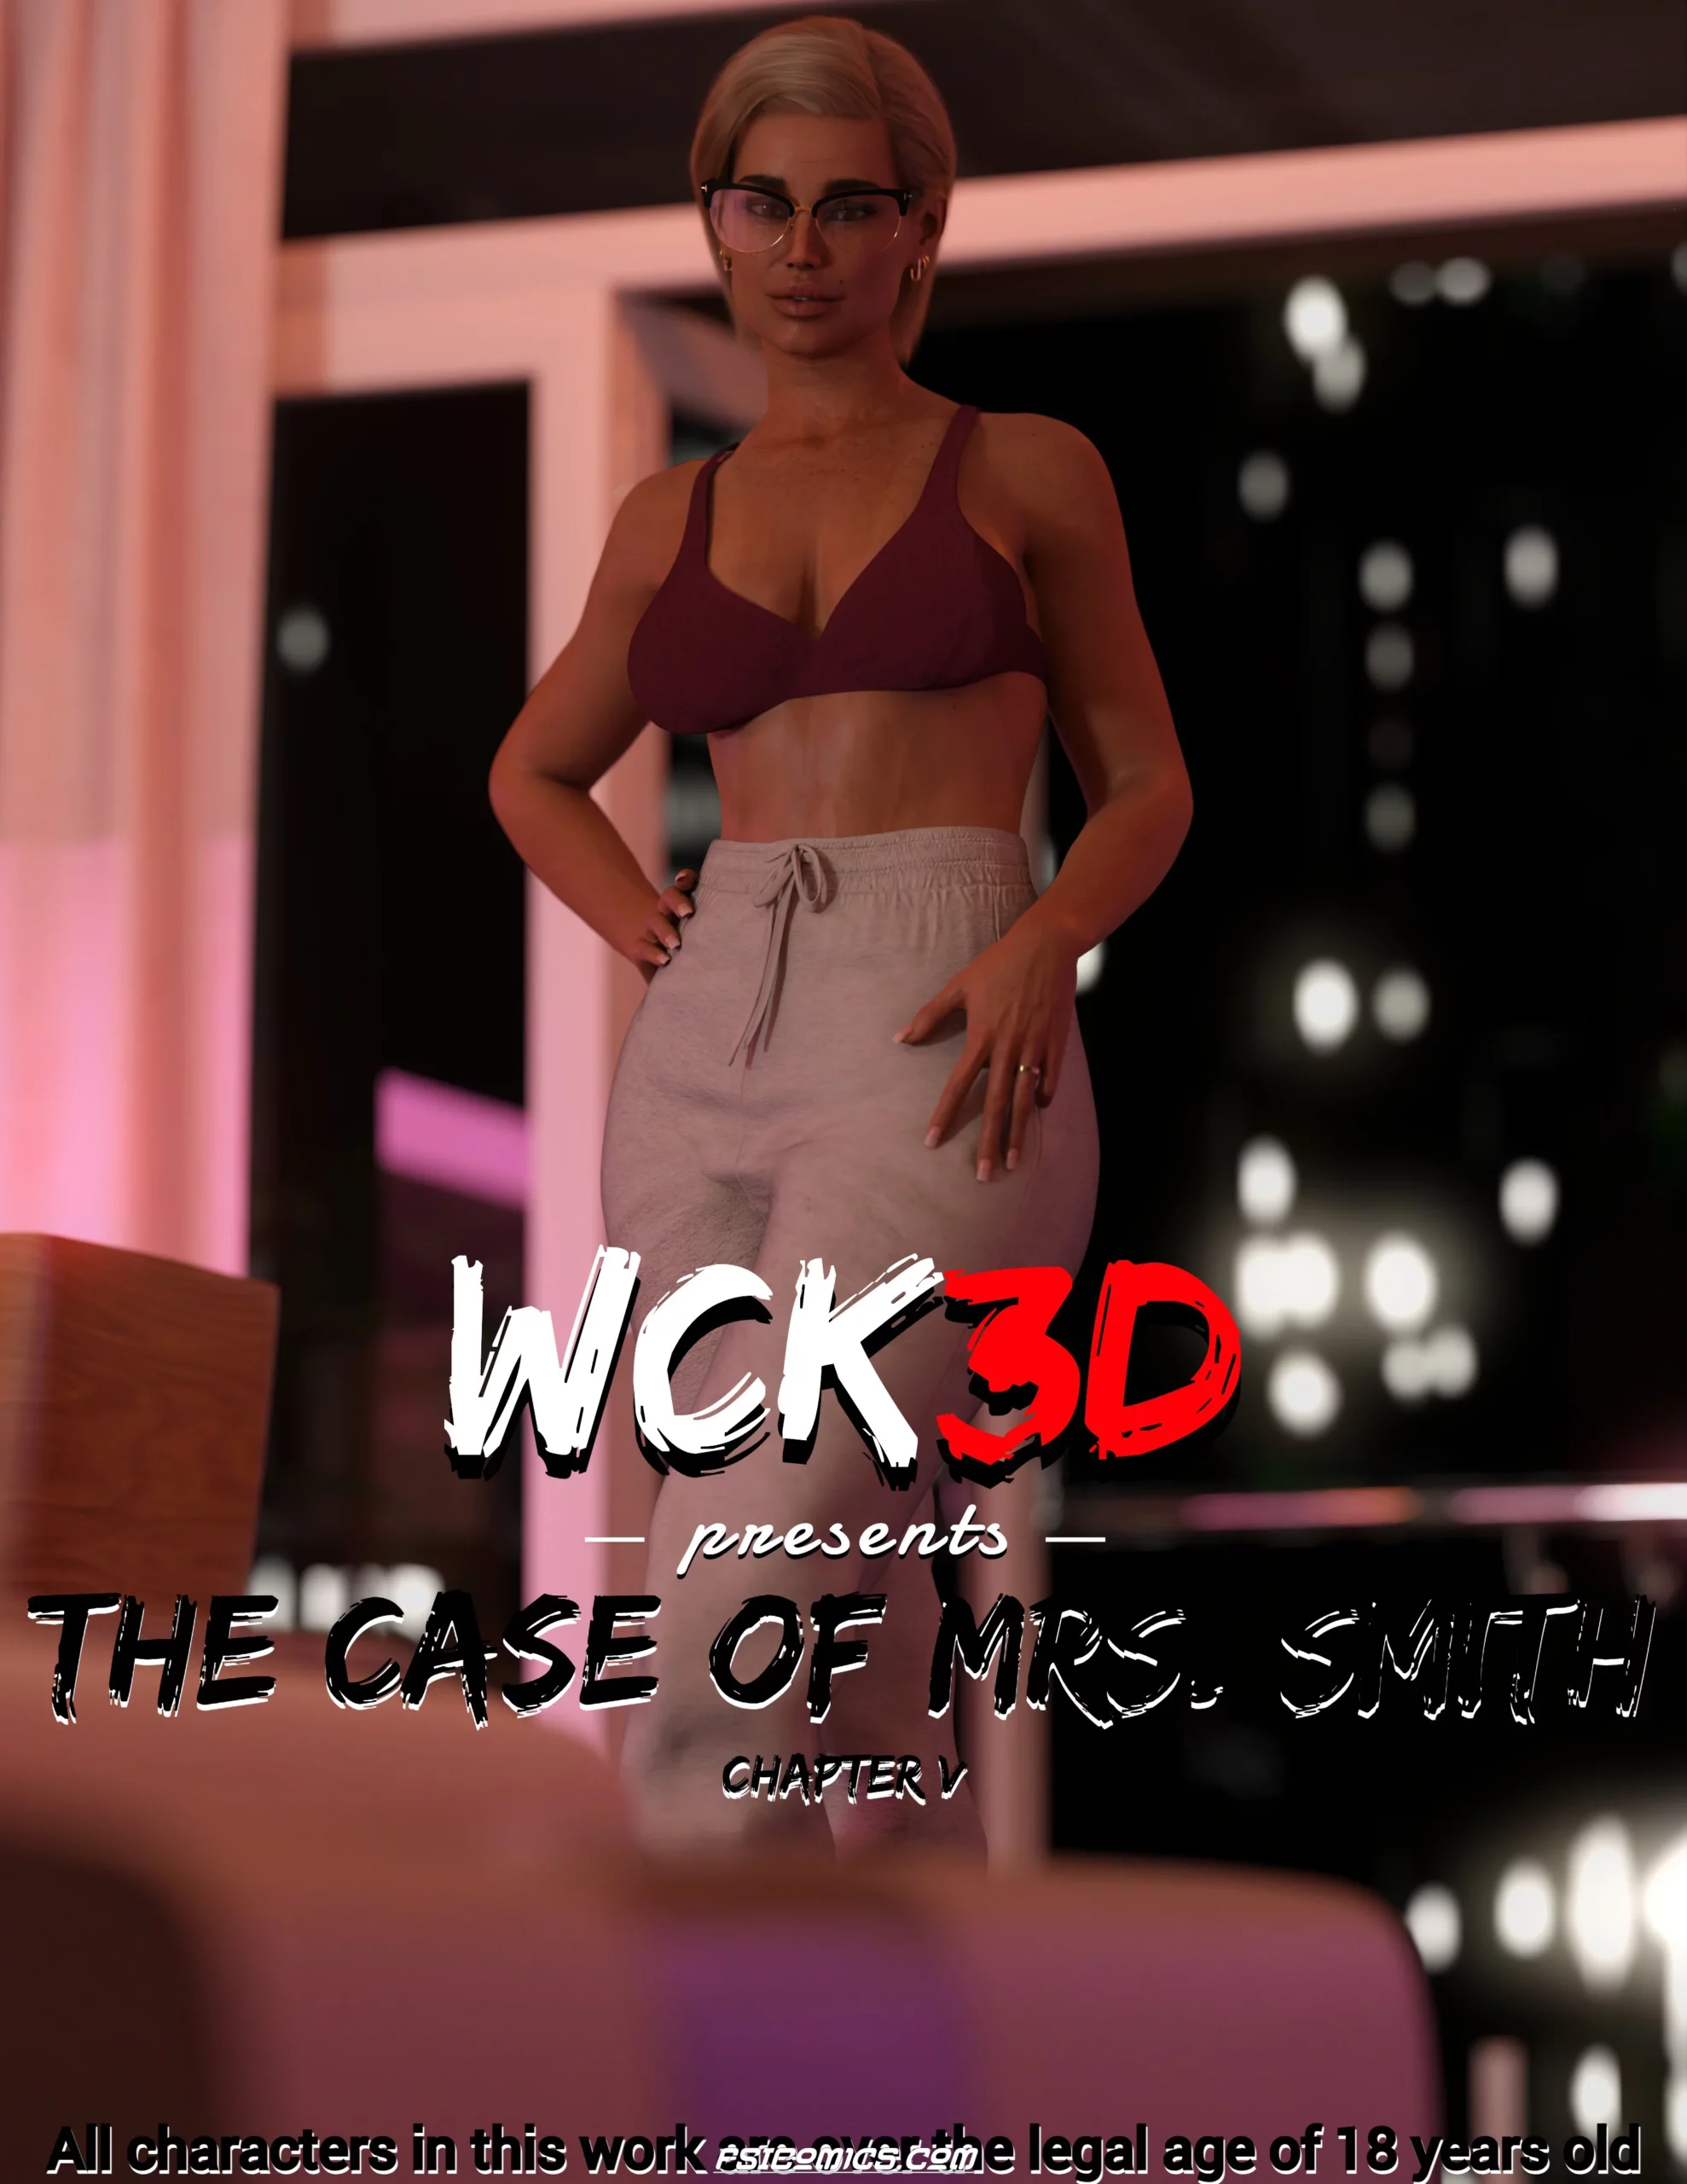 The Case Of Mrs Smith Chapter 5 – WCK3D - 3 - FSIComics